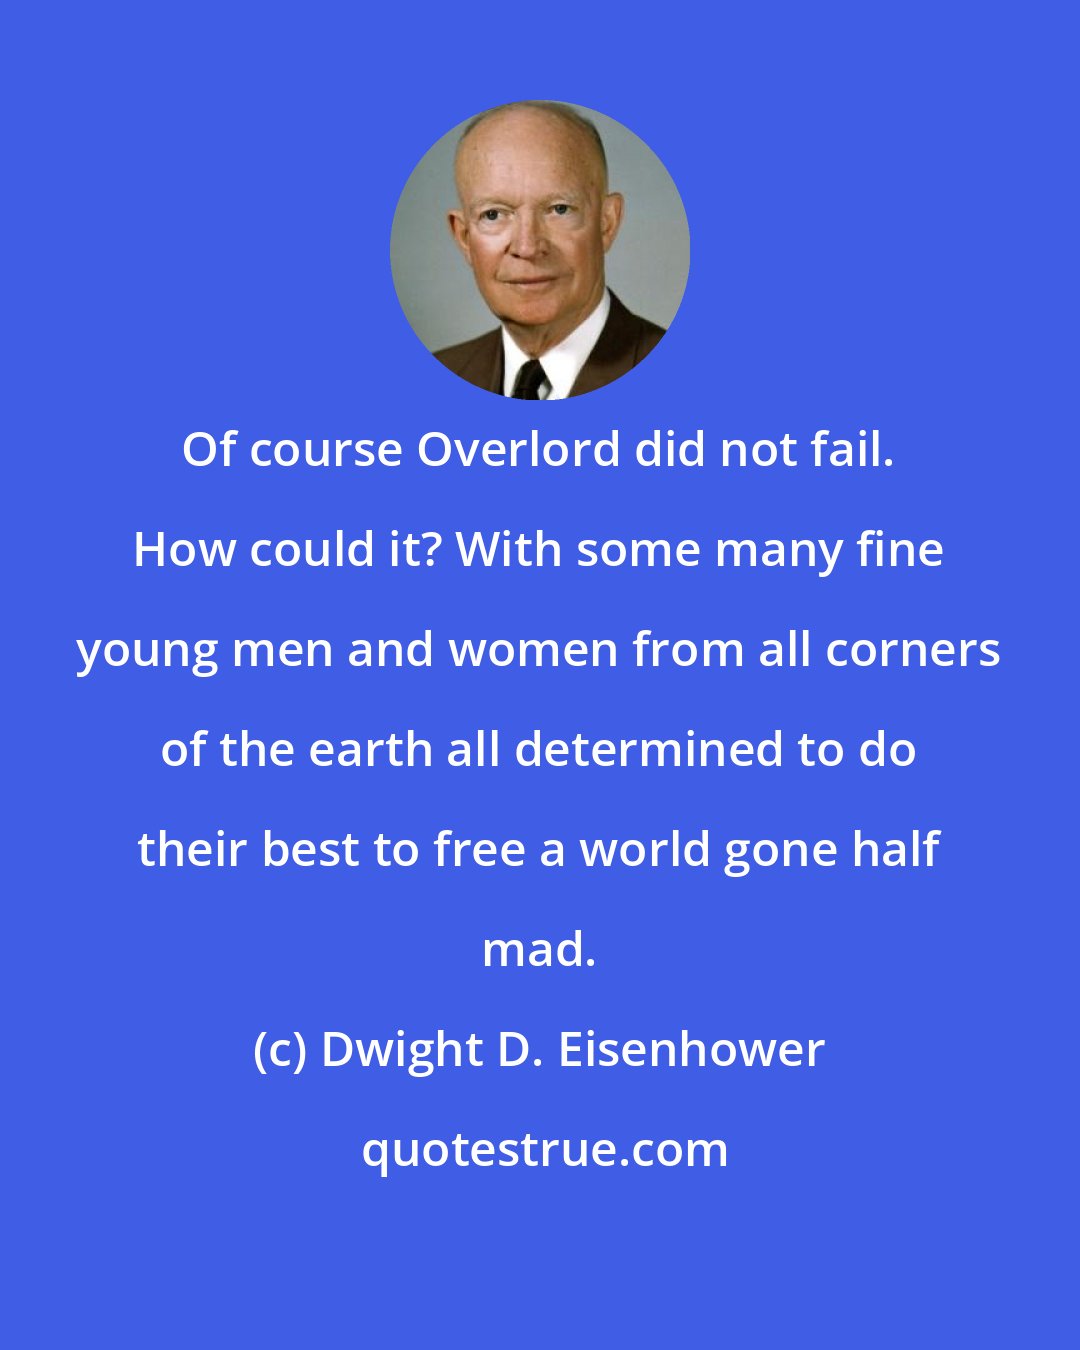 Dwight D. Eisenhower: Of course Overlord did not fail. How could it? With some many fine young men and women from all corners of the earth all determined to do their best to free a world gone half mad.